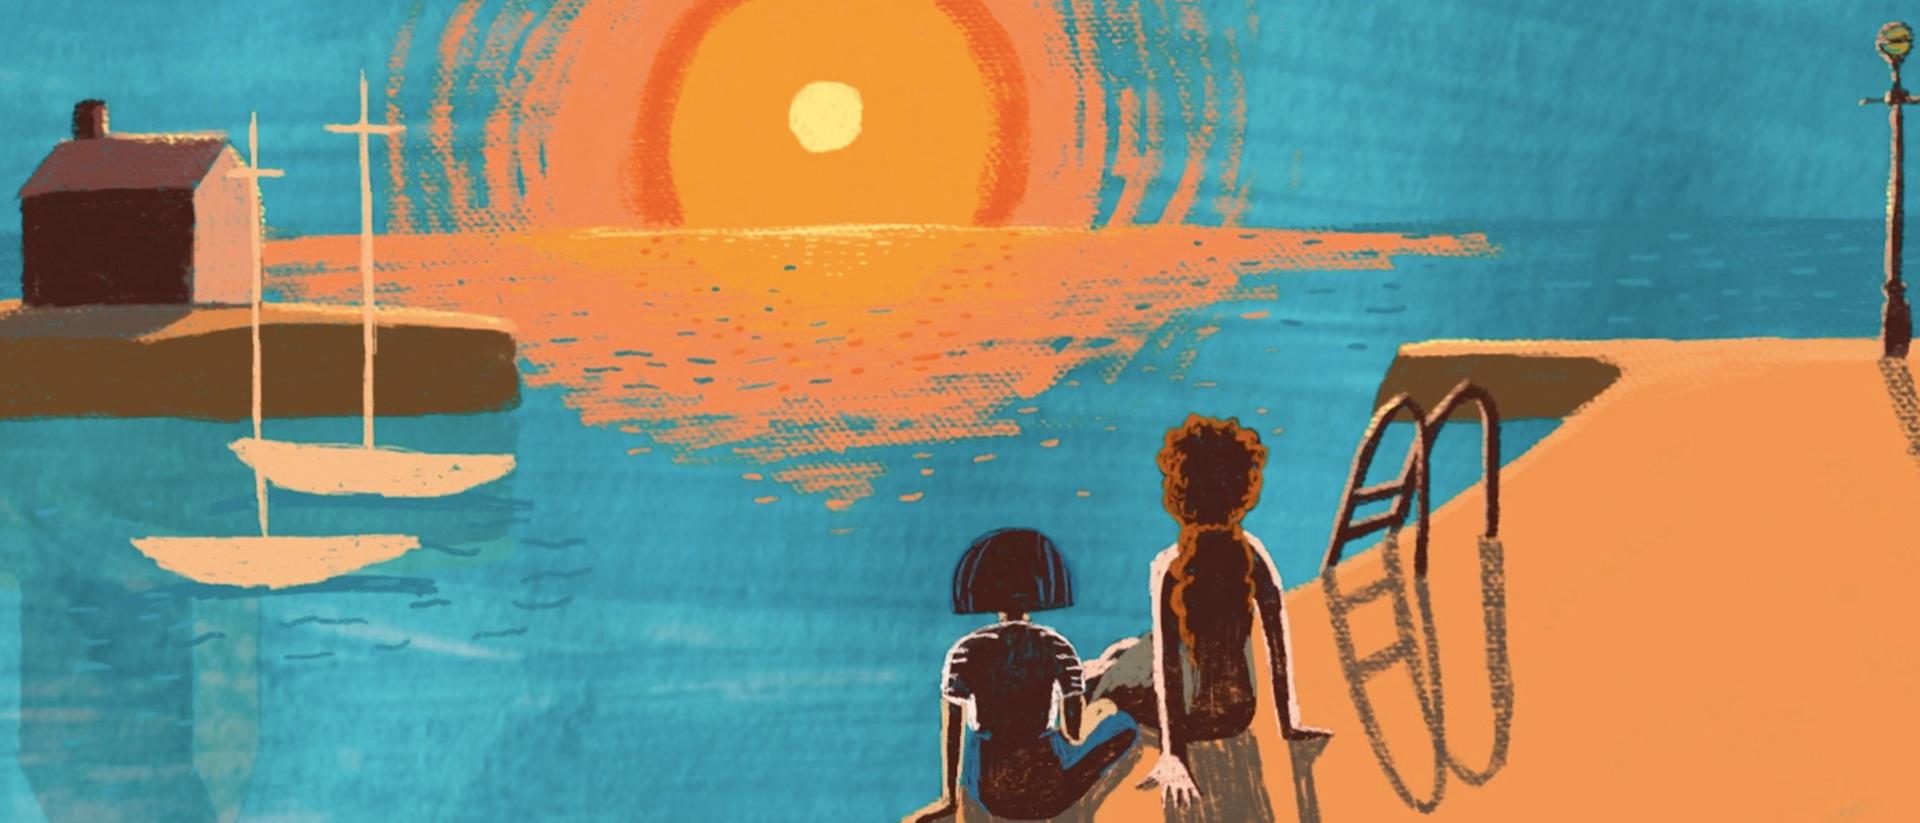 a still from animated short film cwch deilen featuring two people sitting on a dock watching the sun set over the sea